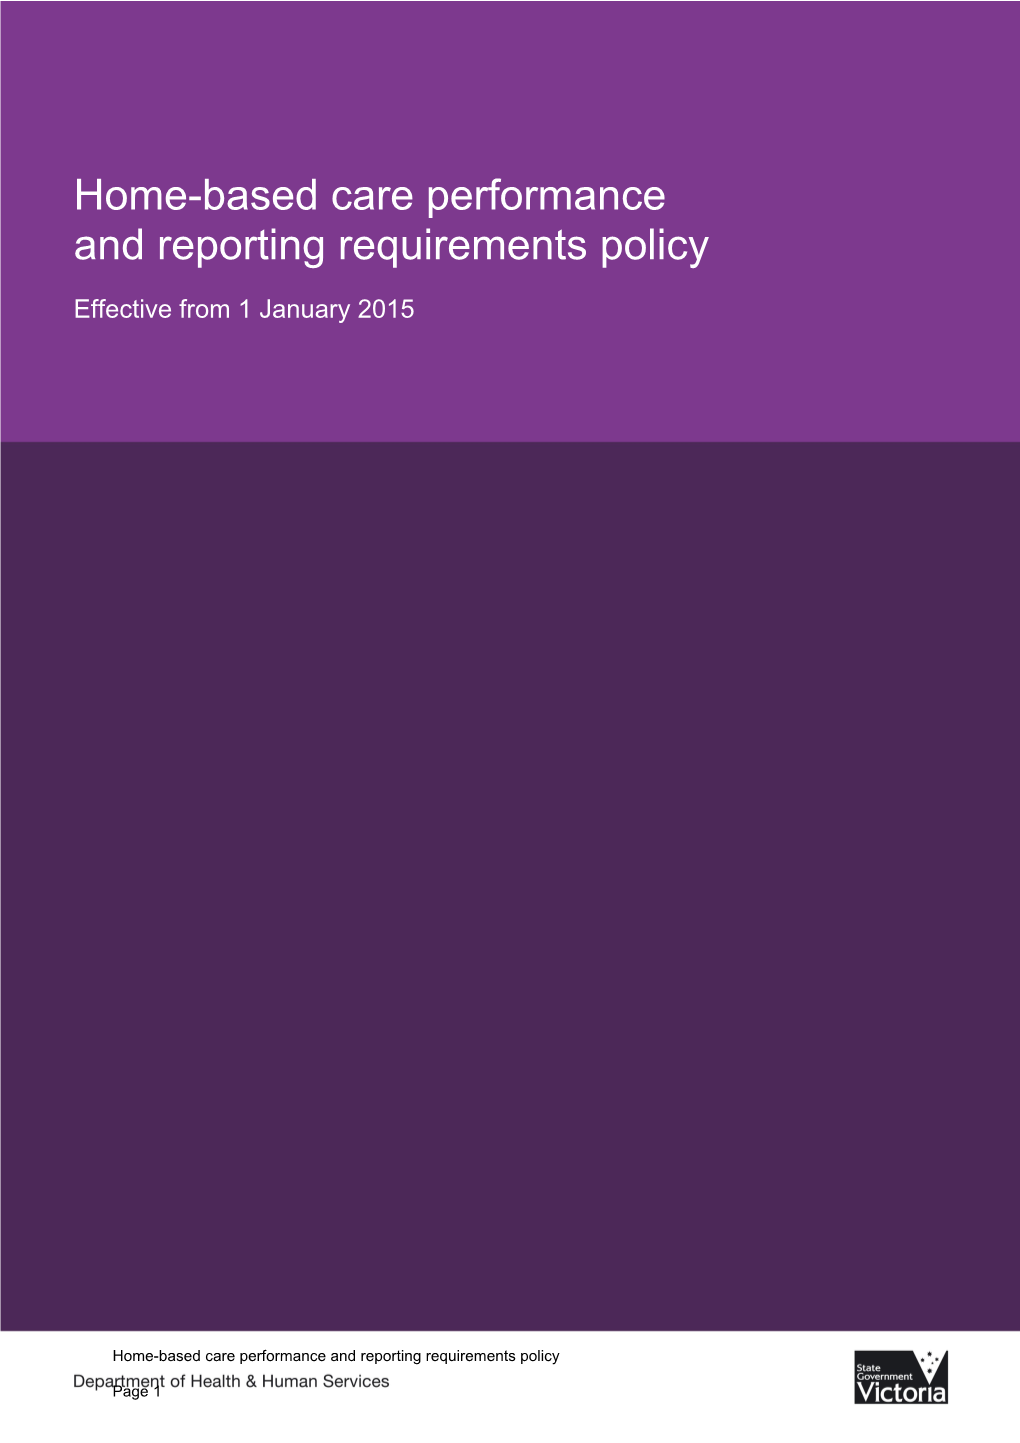 Home-Based Care Performance and Reporting Requirements Policy